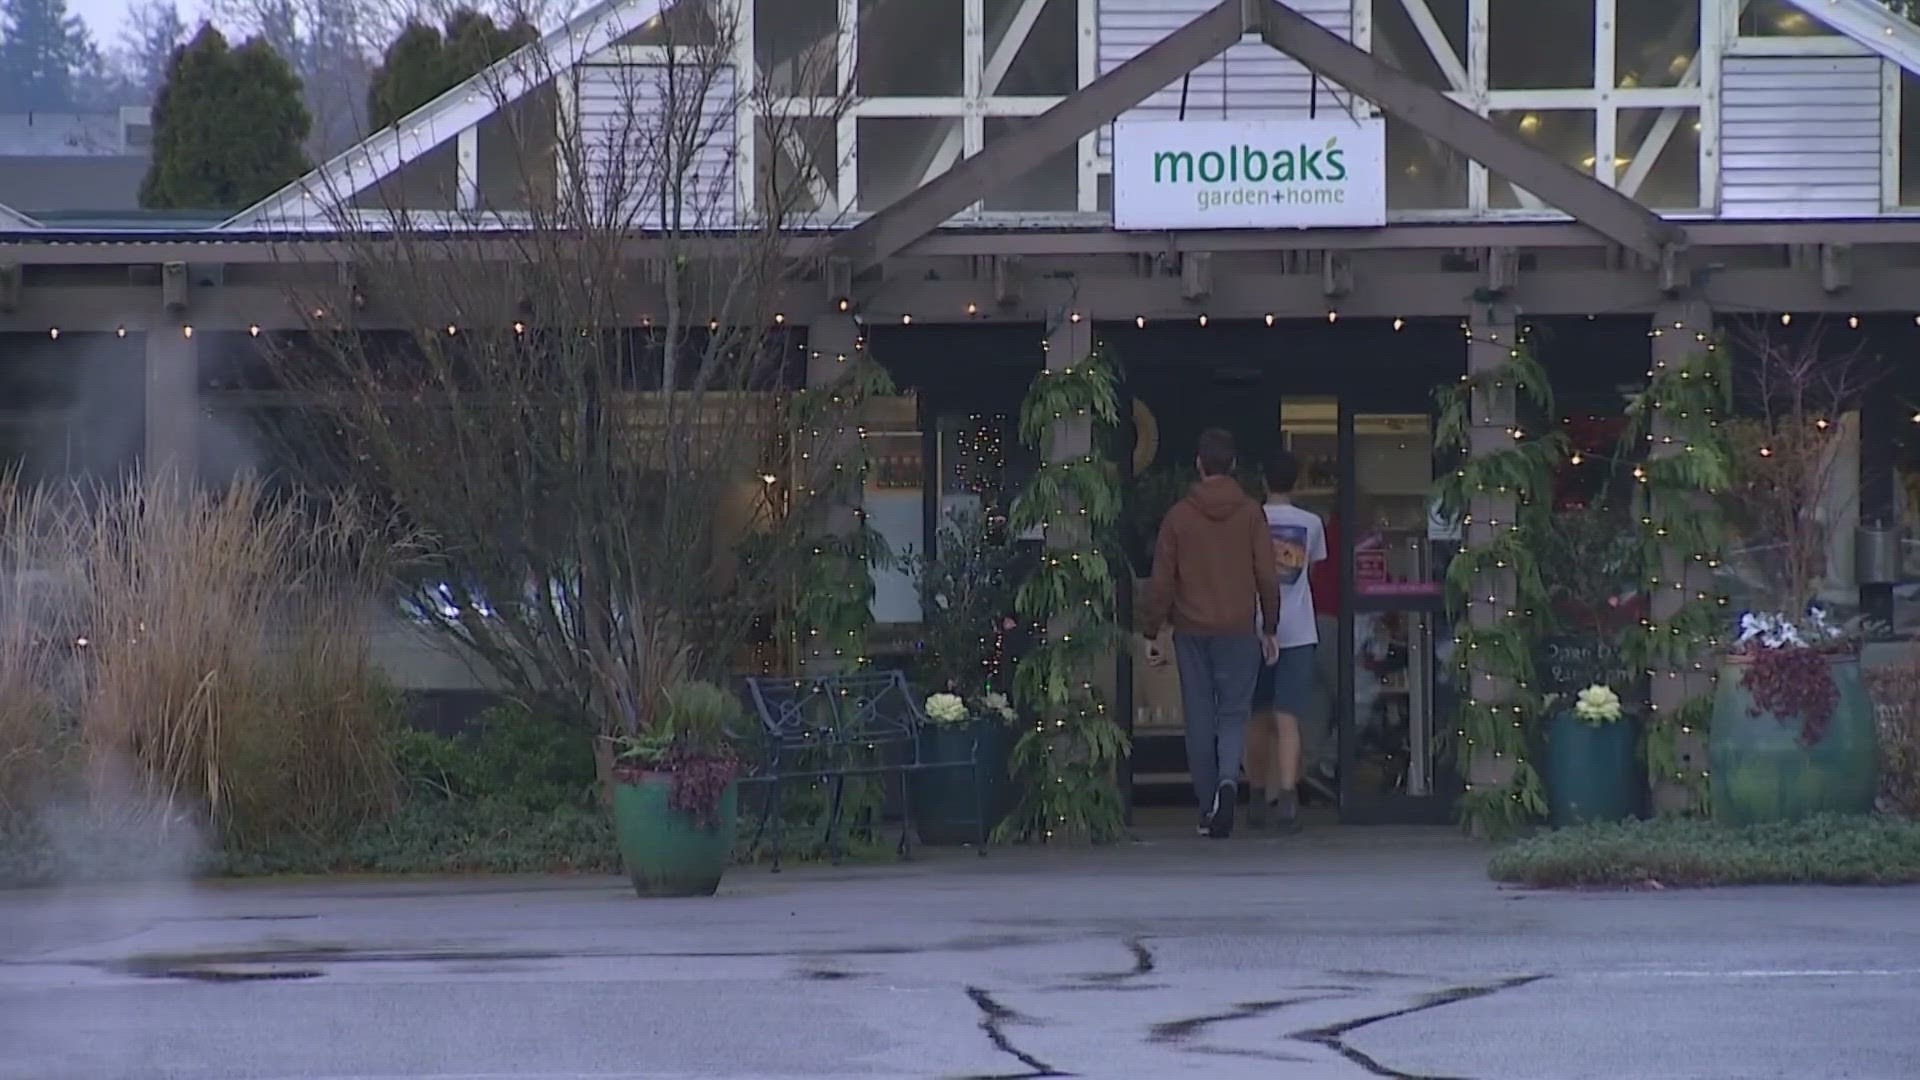 The owners of Molbak’s announced plans to transform the garden retailers’ former site following the support it received during its closure earlier this year.